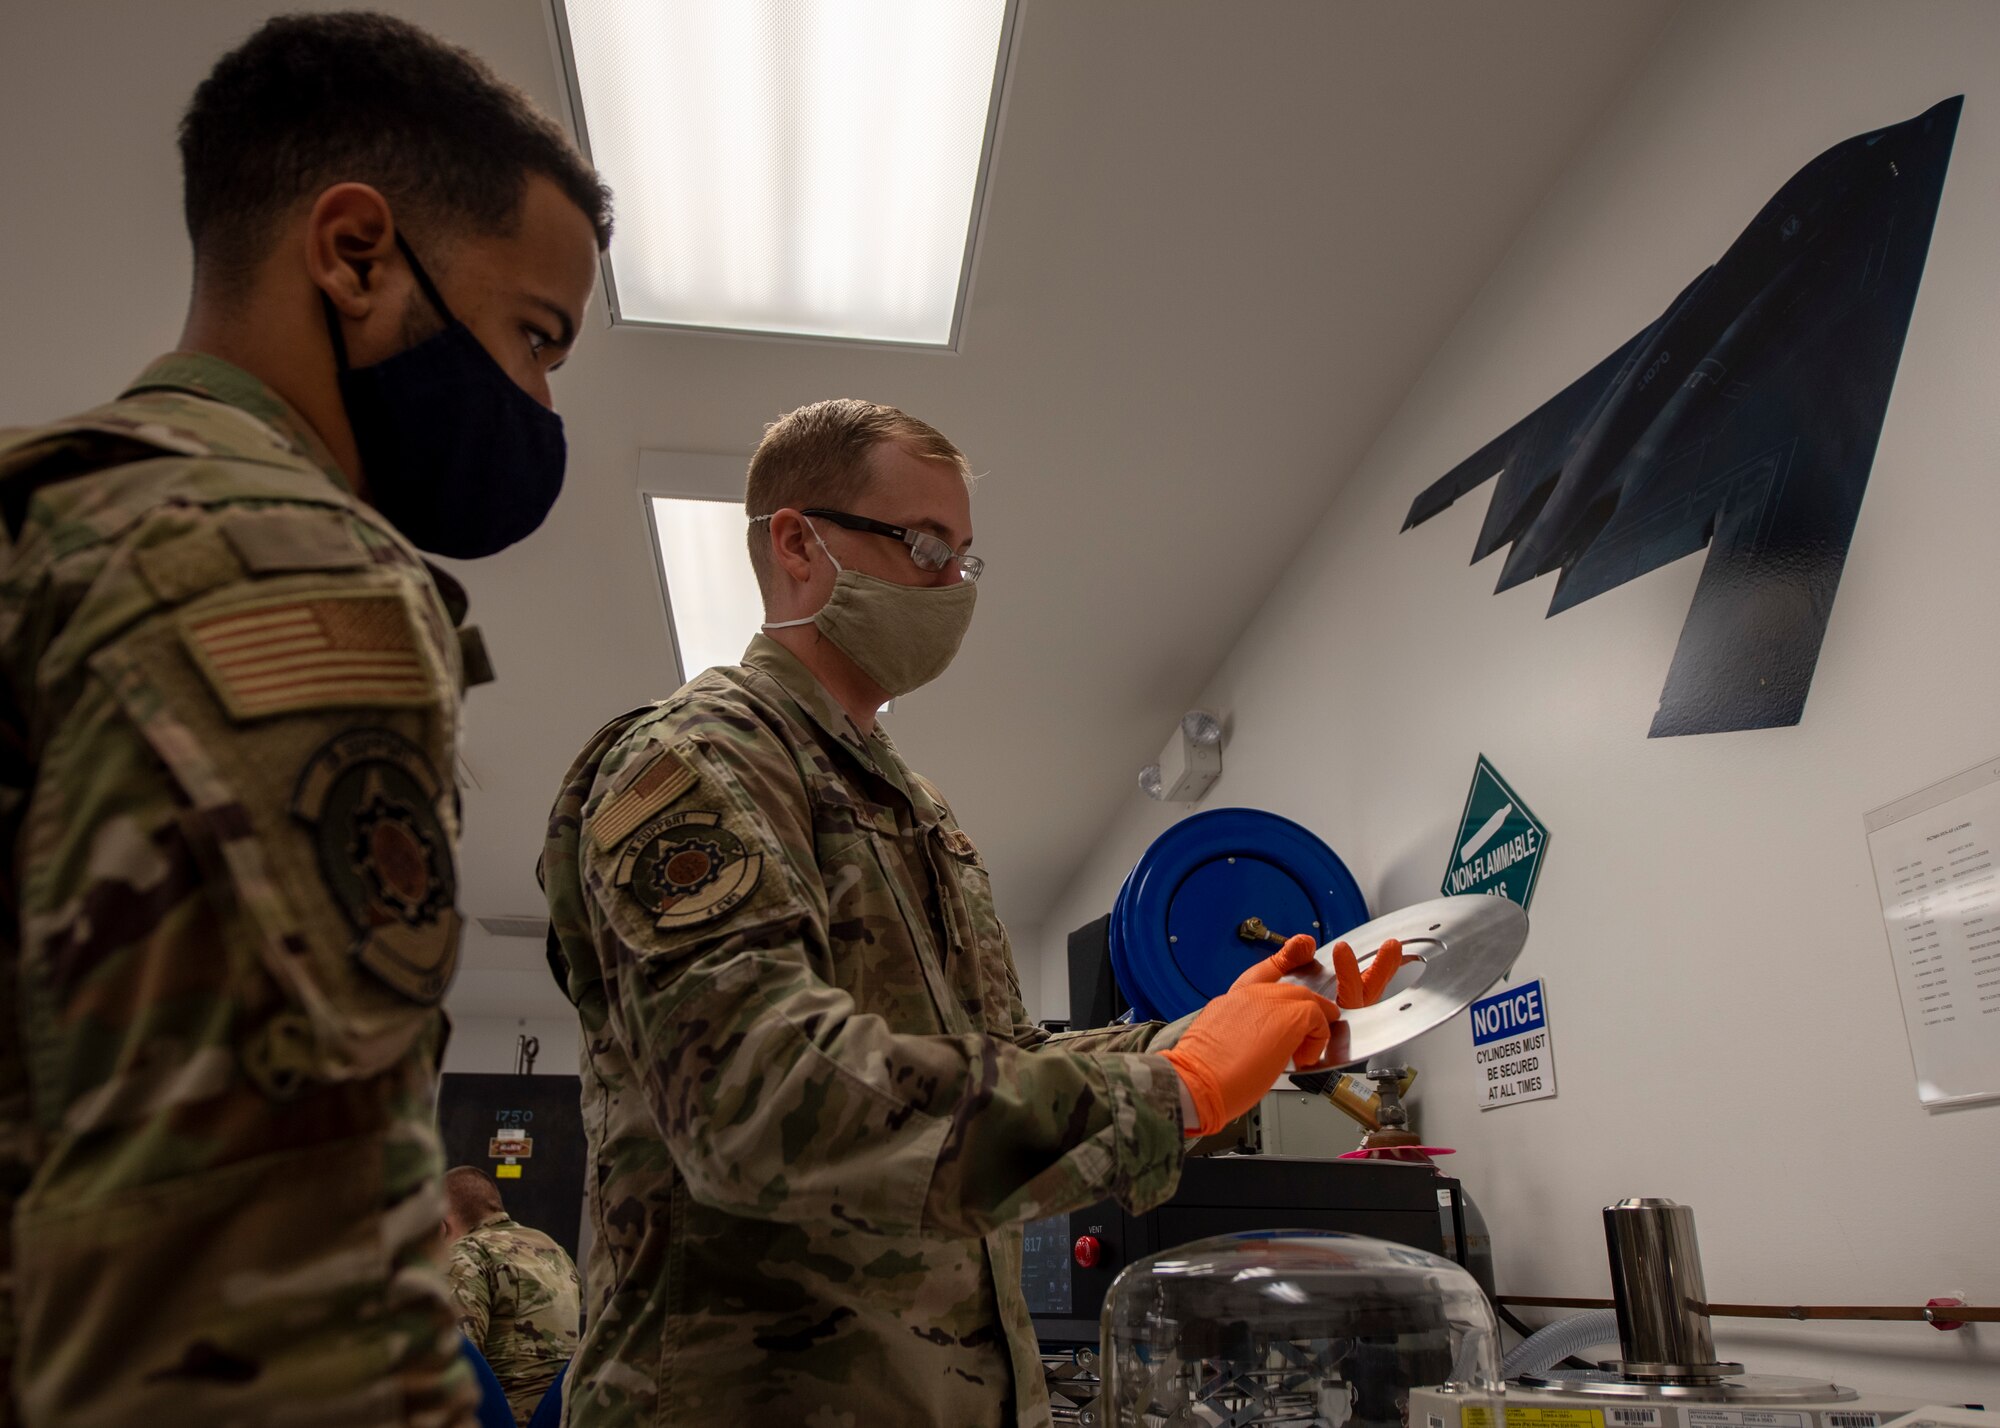 Tech. Sgt. KC Berger, 4th Component Maintenance Squadron physical dimensional element Non-commissioned Officer in Charge (right), trains the use of primary pneumatic pressure standard use to Senior Airman Thiago Santos, 4 CMS electronics technician (left), at Seymour Johnson Air Force Base, North Carolina, Oct. 19, 2020.